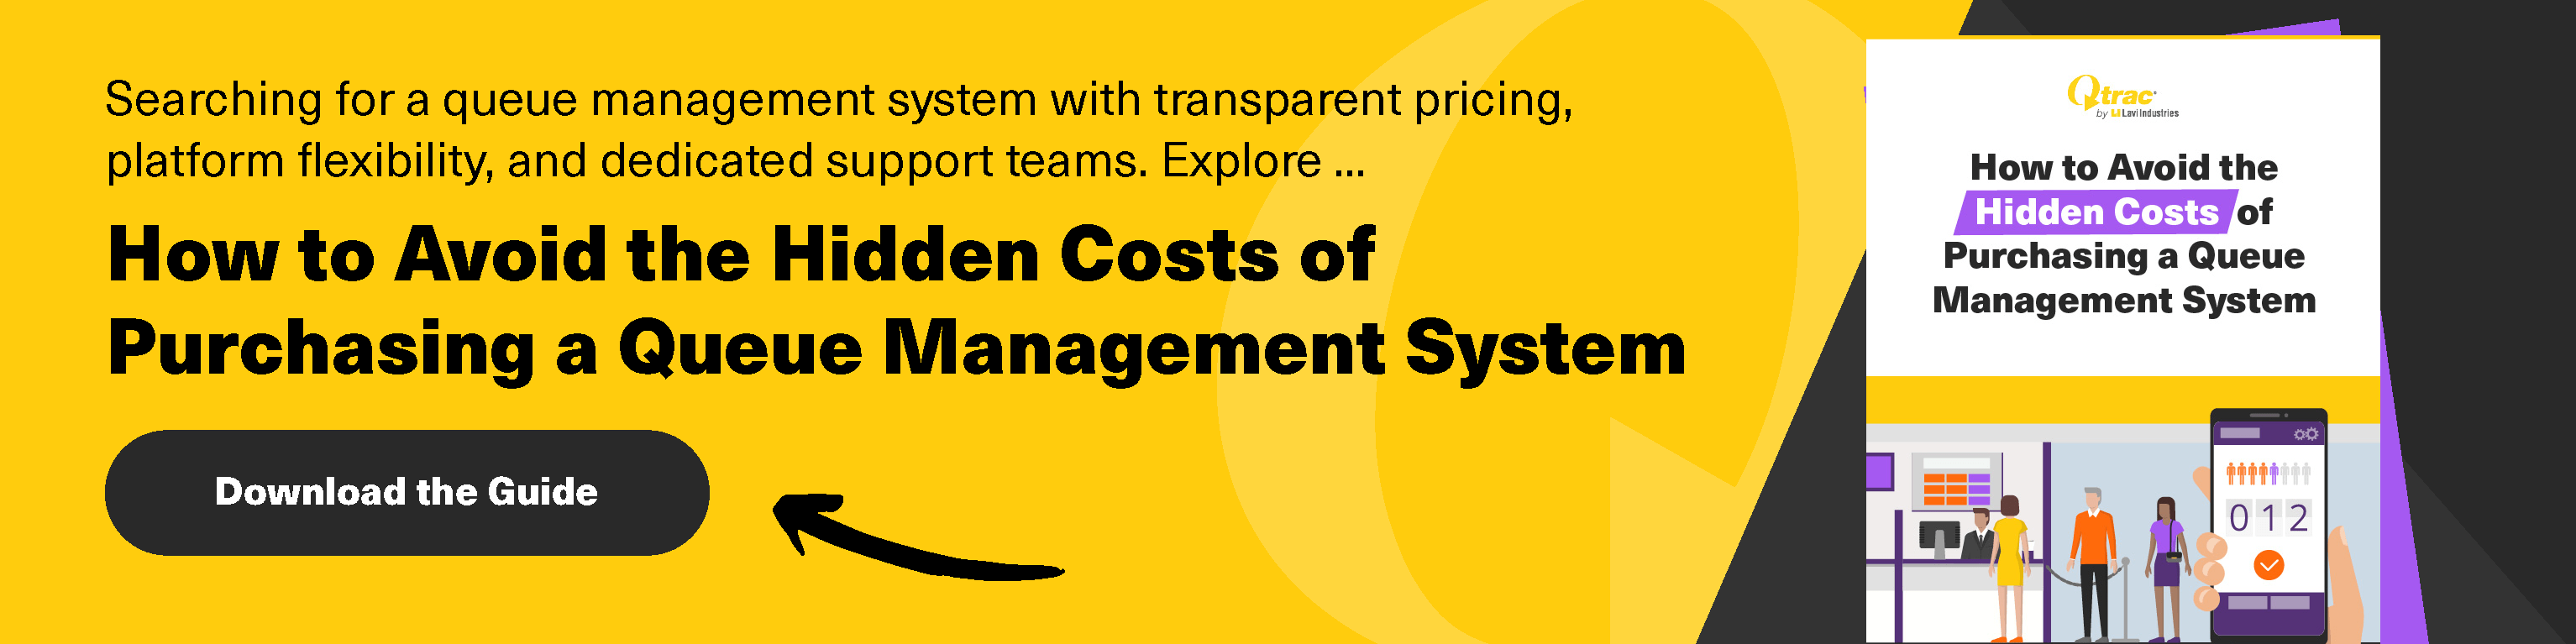 How to Avoid the Hidden Costs of Purchasing a Queue Management System